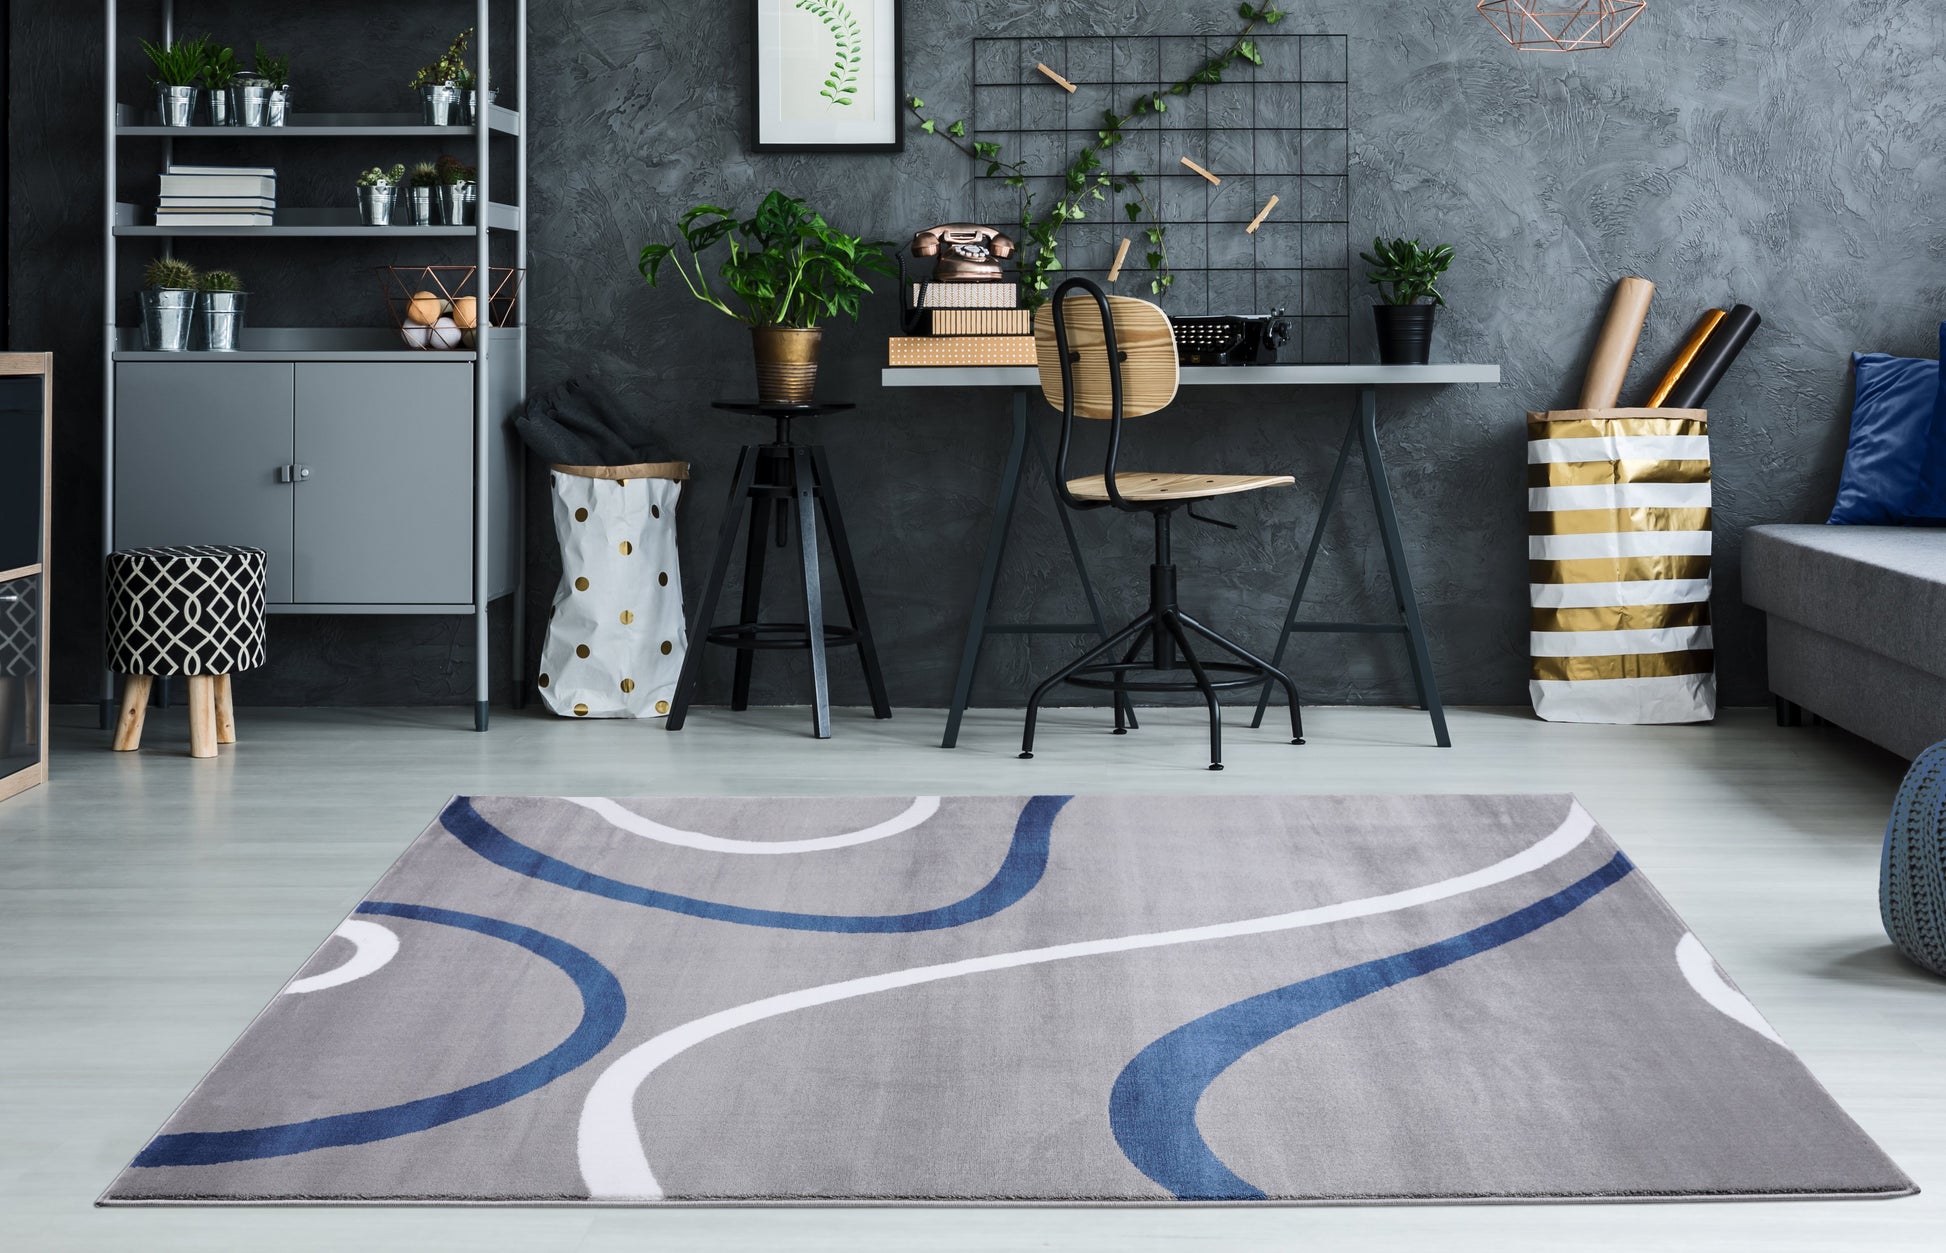 ladole rugs beautiful soft turkish gray blue contemporary spriral area rug carpet 8x11 2x5, 3x5 Runner Rug, Entry Way, Entrance, Balcony, Bedside, Home Office, Table Top